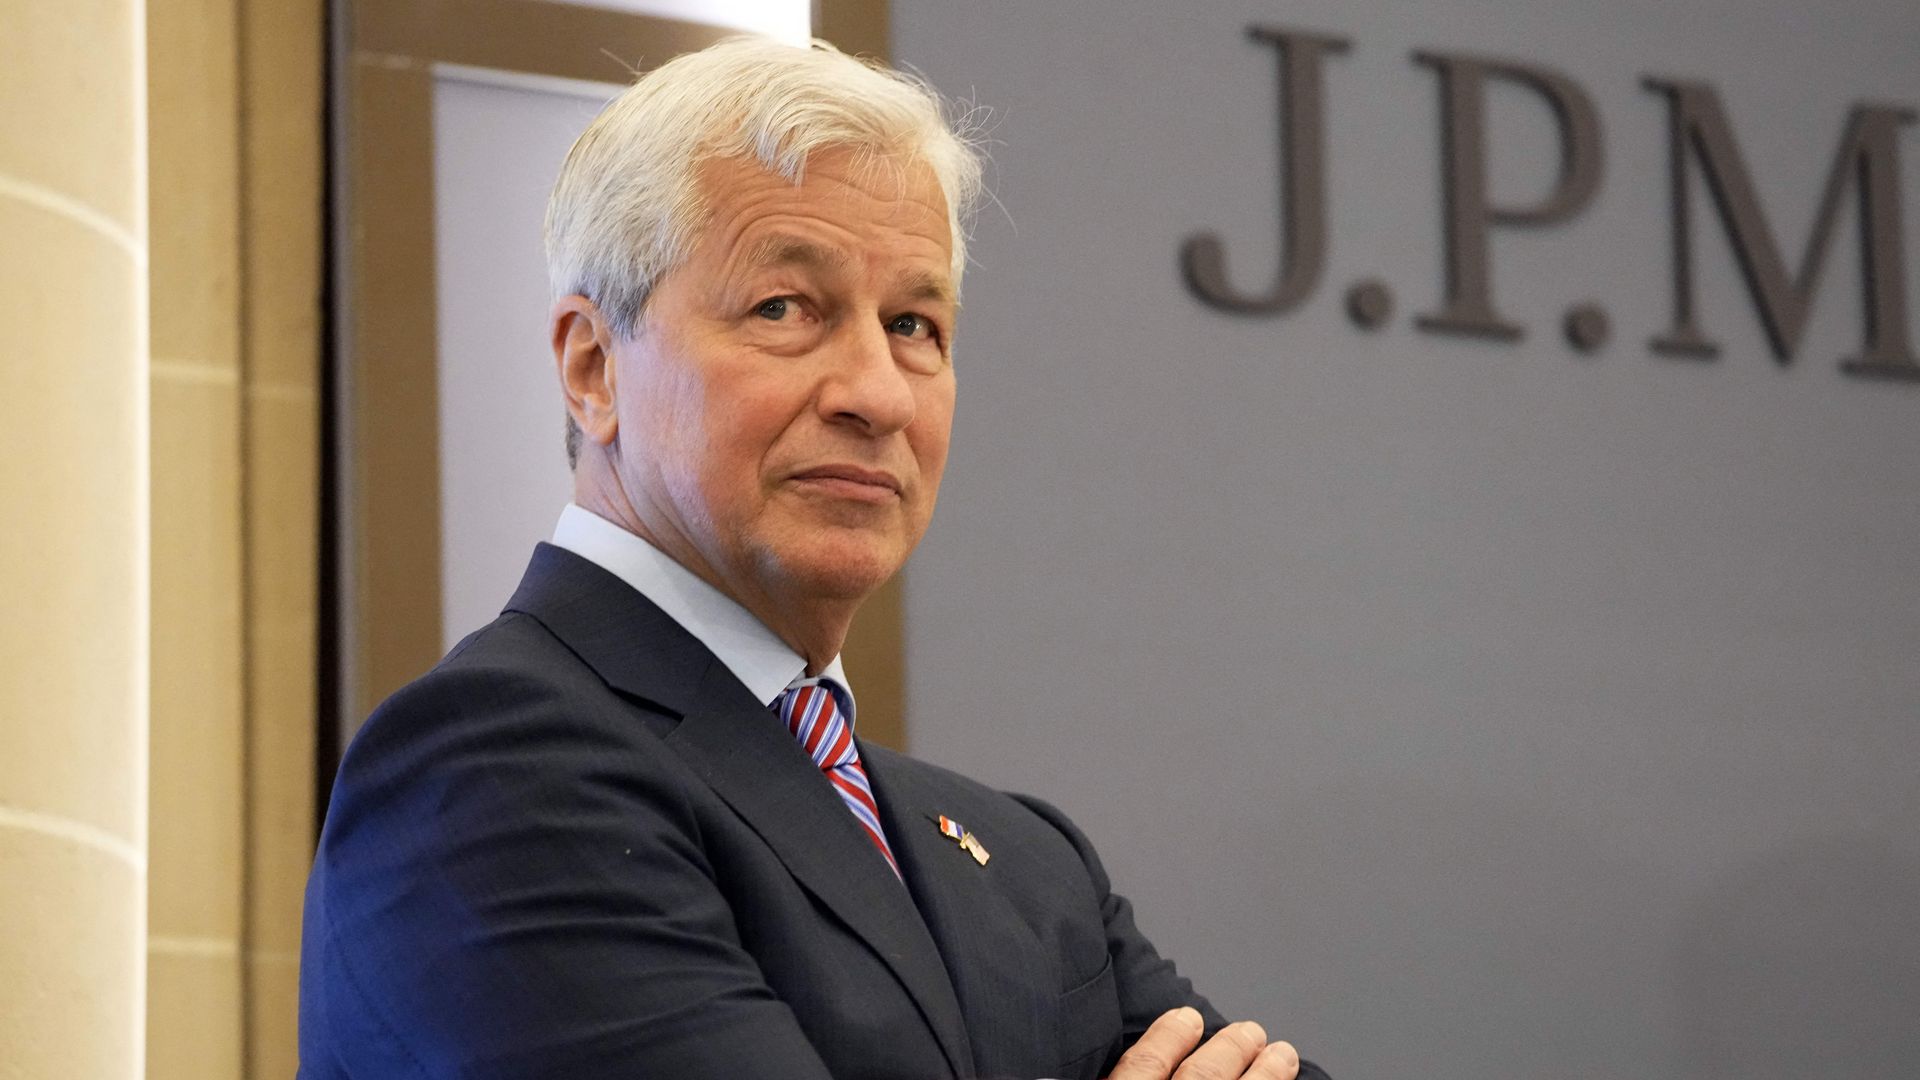 Jamie Dimon is seen with his arms crossed.